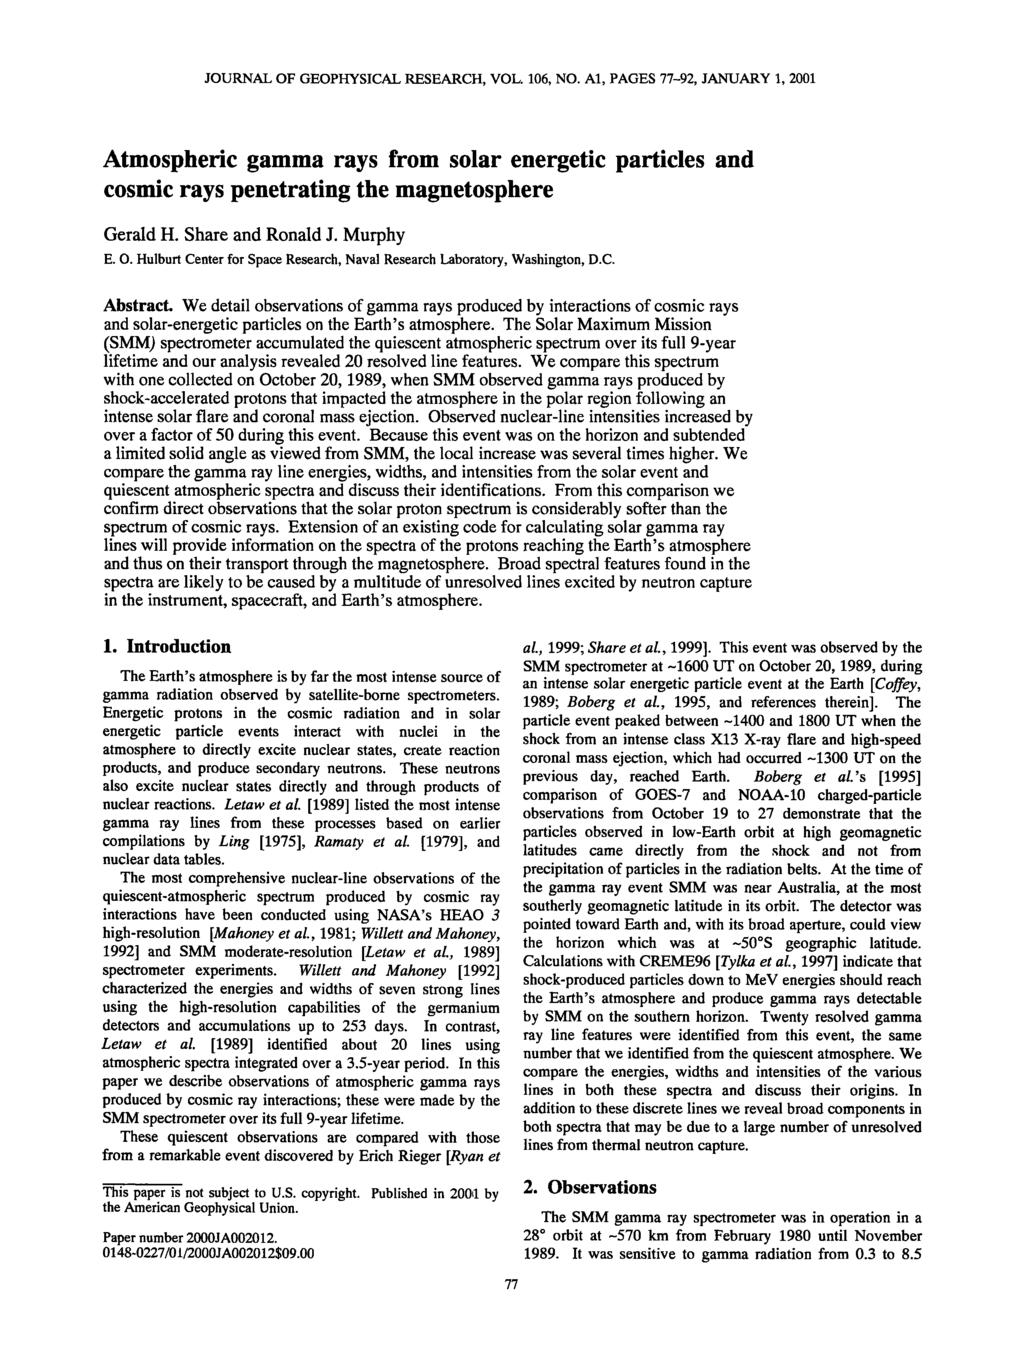 JOURNAL OF GEOPHYSICAL RESEARCH, VOL. 106, NO. A1, PAGES 77-92, JANUARY 1, 2001 Atmospheric gamma rays from solar energetic particles and cosmic rays penetrating the magnetosphere Gerald H.